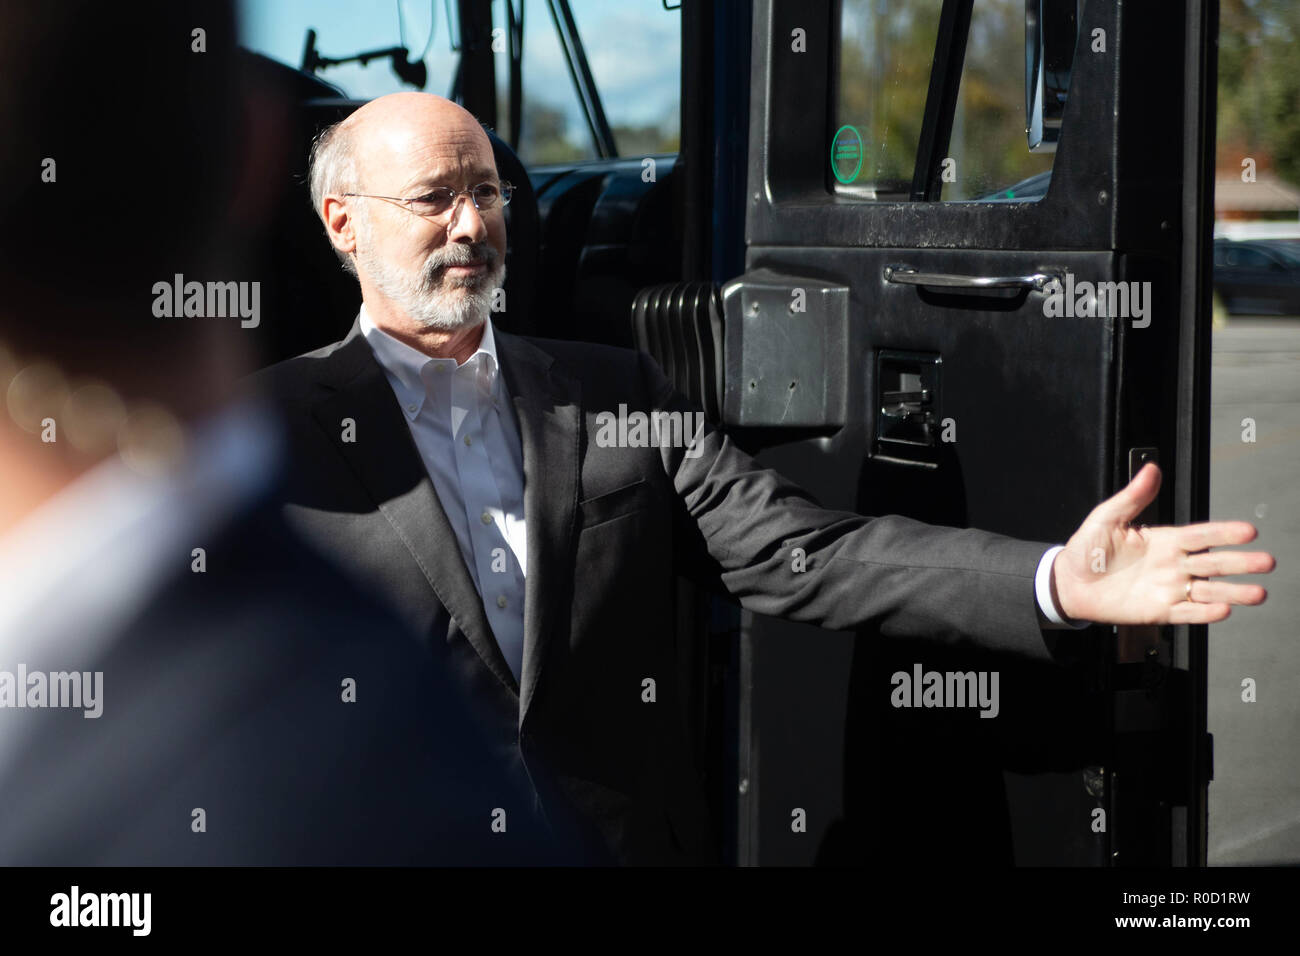 Philadelphia, Pennsylvania, USA. November 3, 2018 - Governor Tom Wolf arrives at a get-out-the-vote rally in Philadelphia, November 3, 2018. Credit: Michael Candelori/ZUMA Wire/Alamy Live News Stock Photo